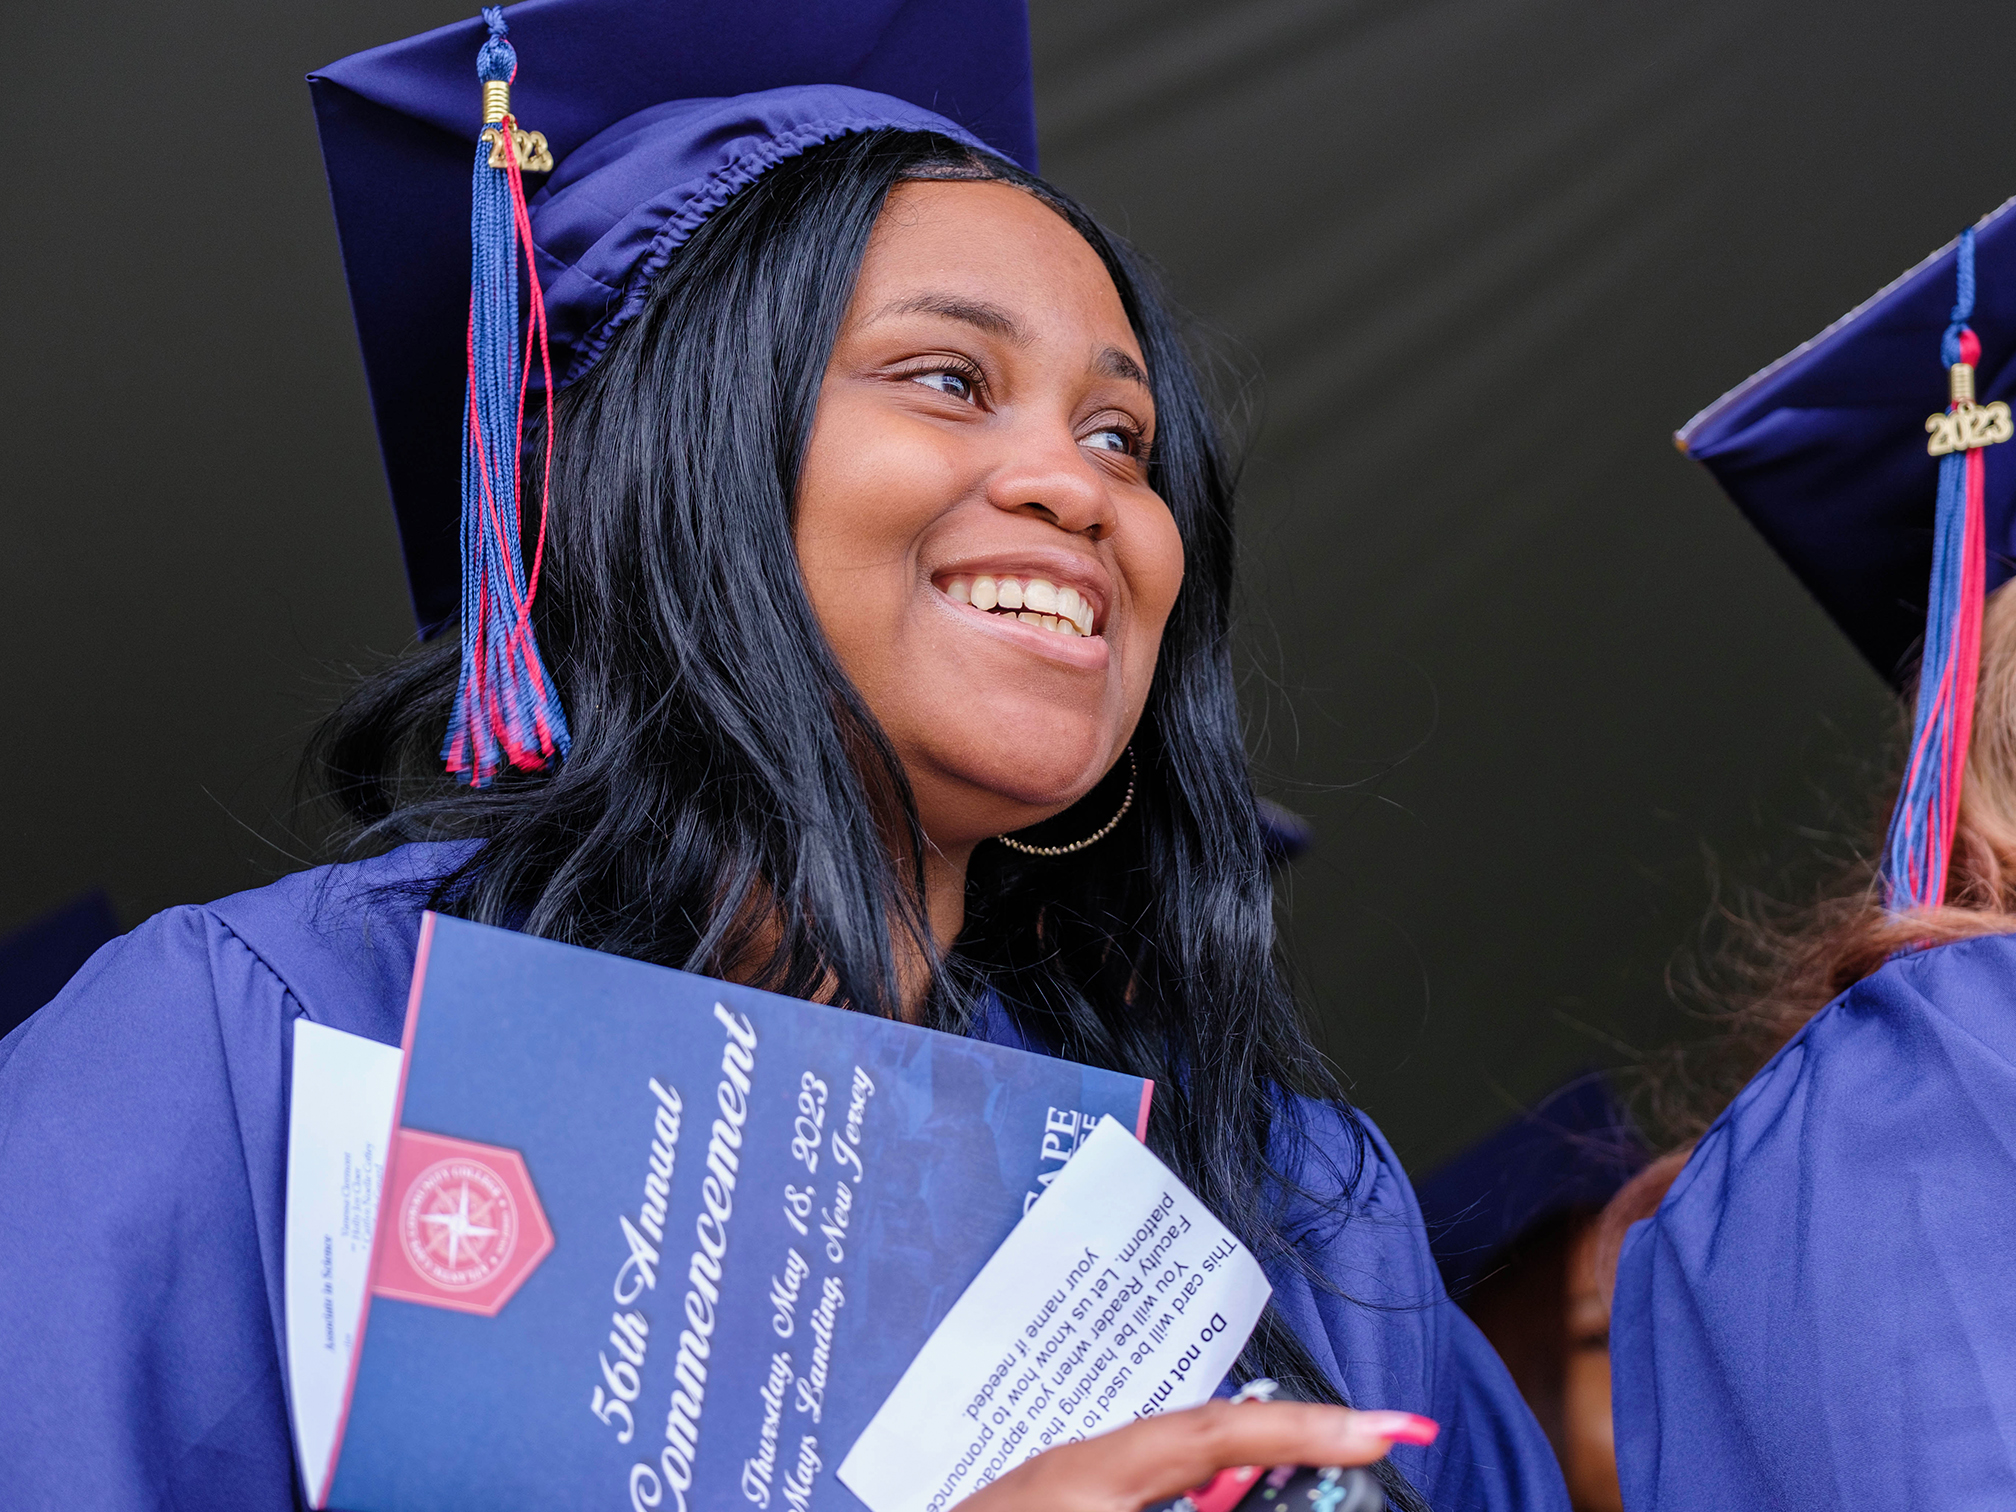 Student smiling at commencement